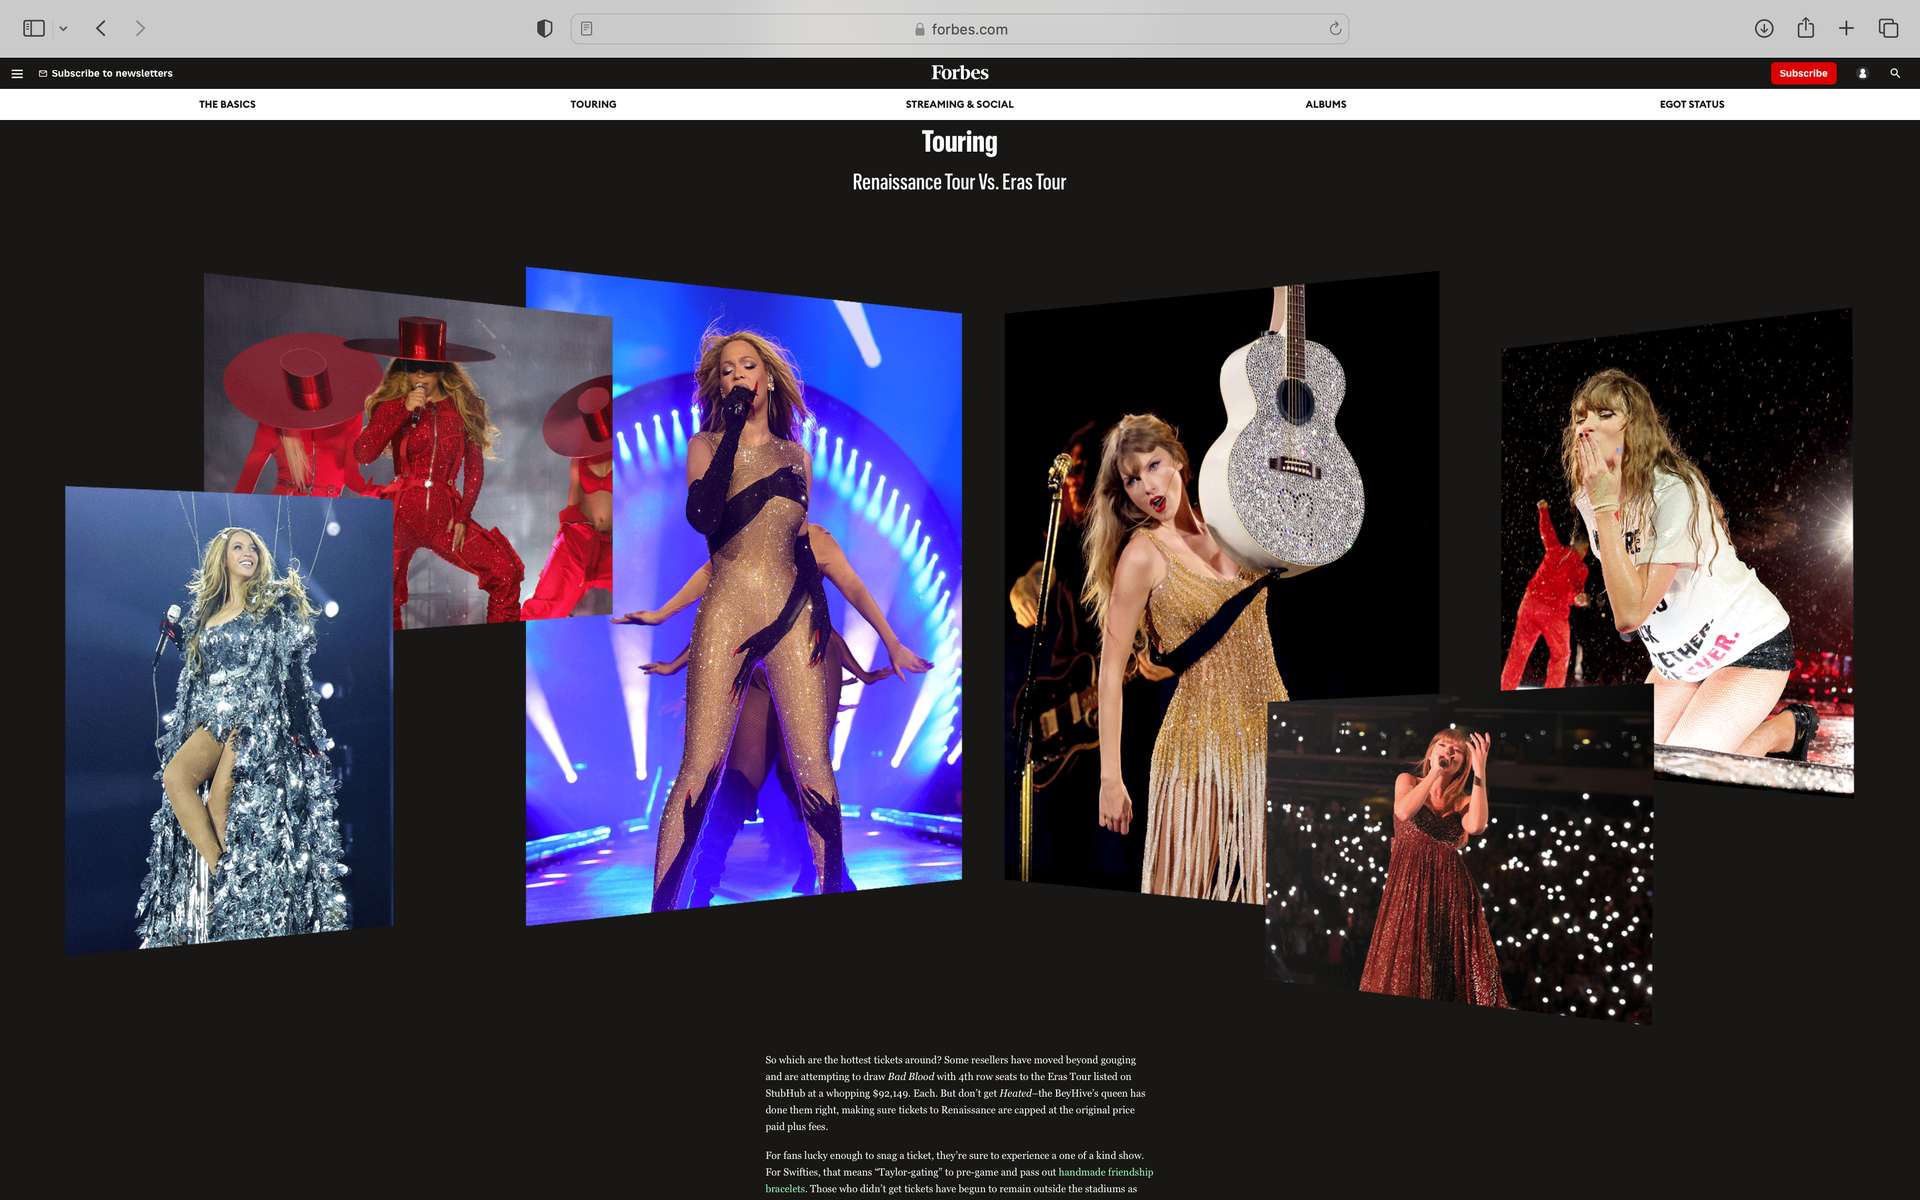 Beyonce vs. Taylor  |  Photo research + edit for Forbes, 2023